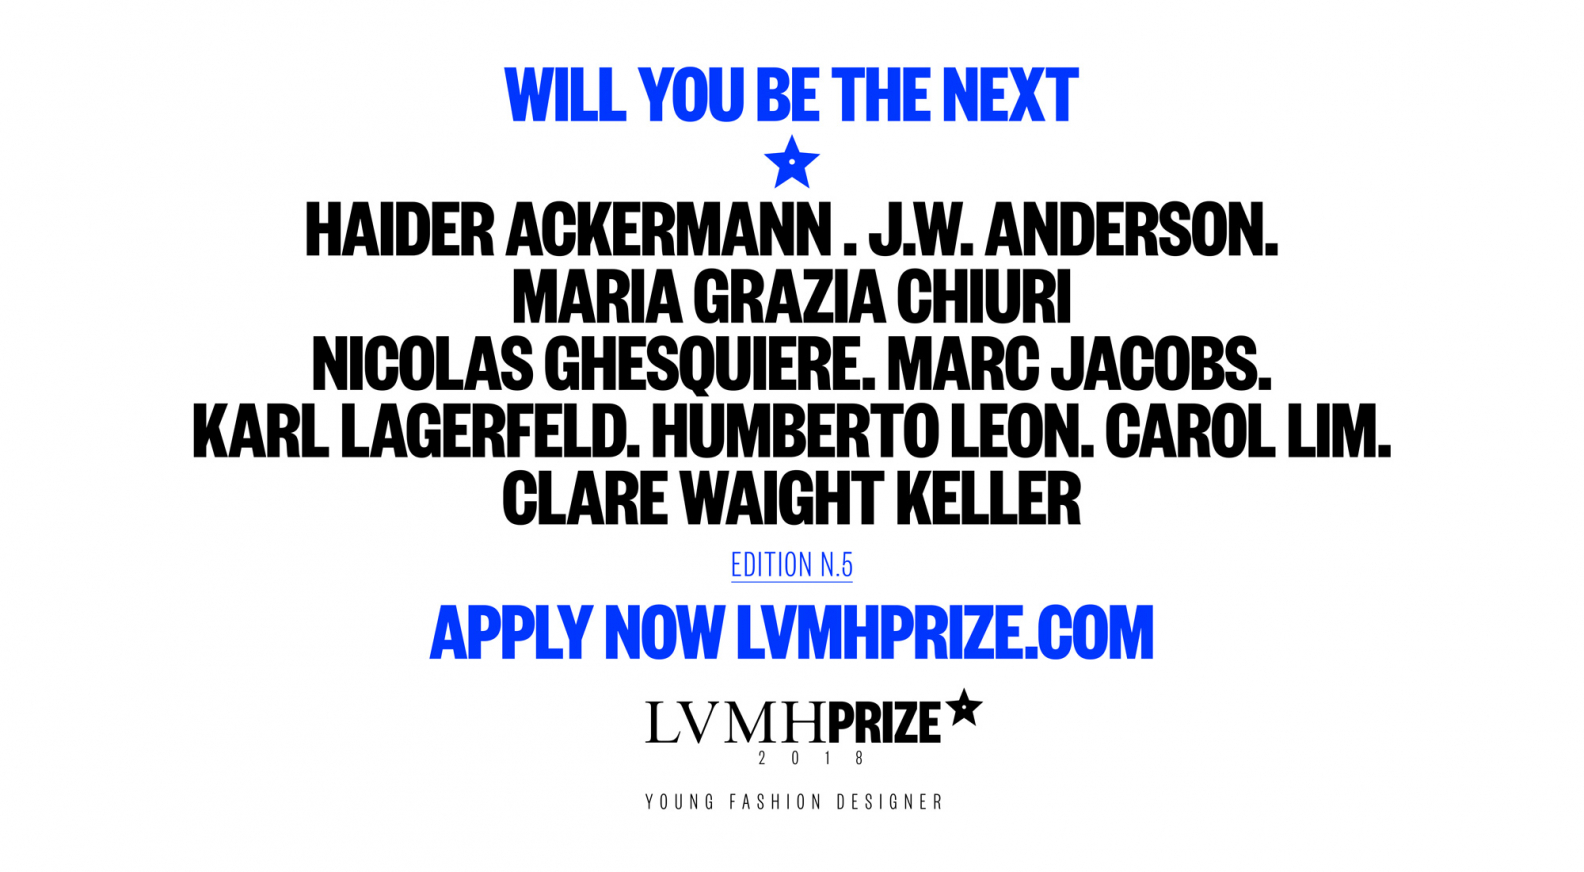 Winner takes it all: the 2018 LVMH prize - Lux Magazine